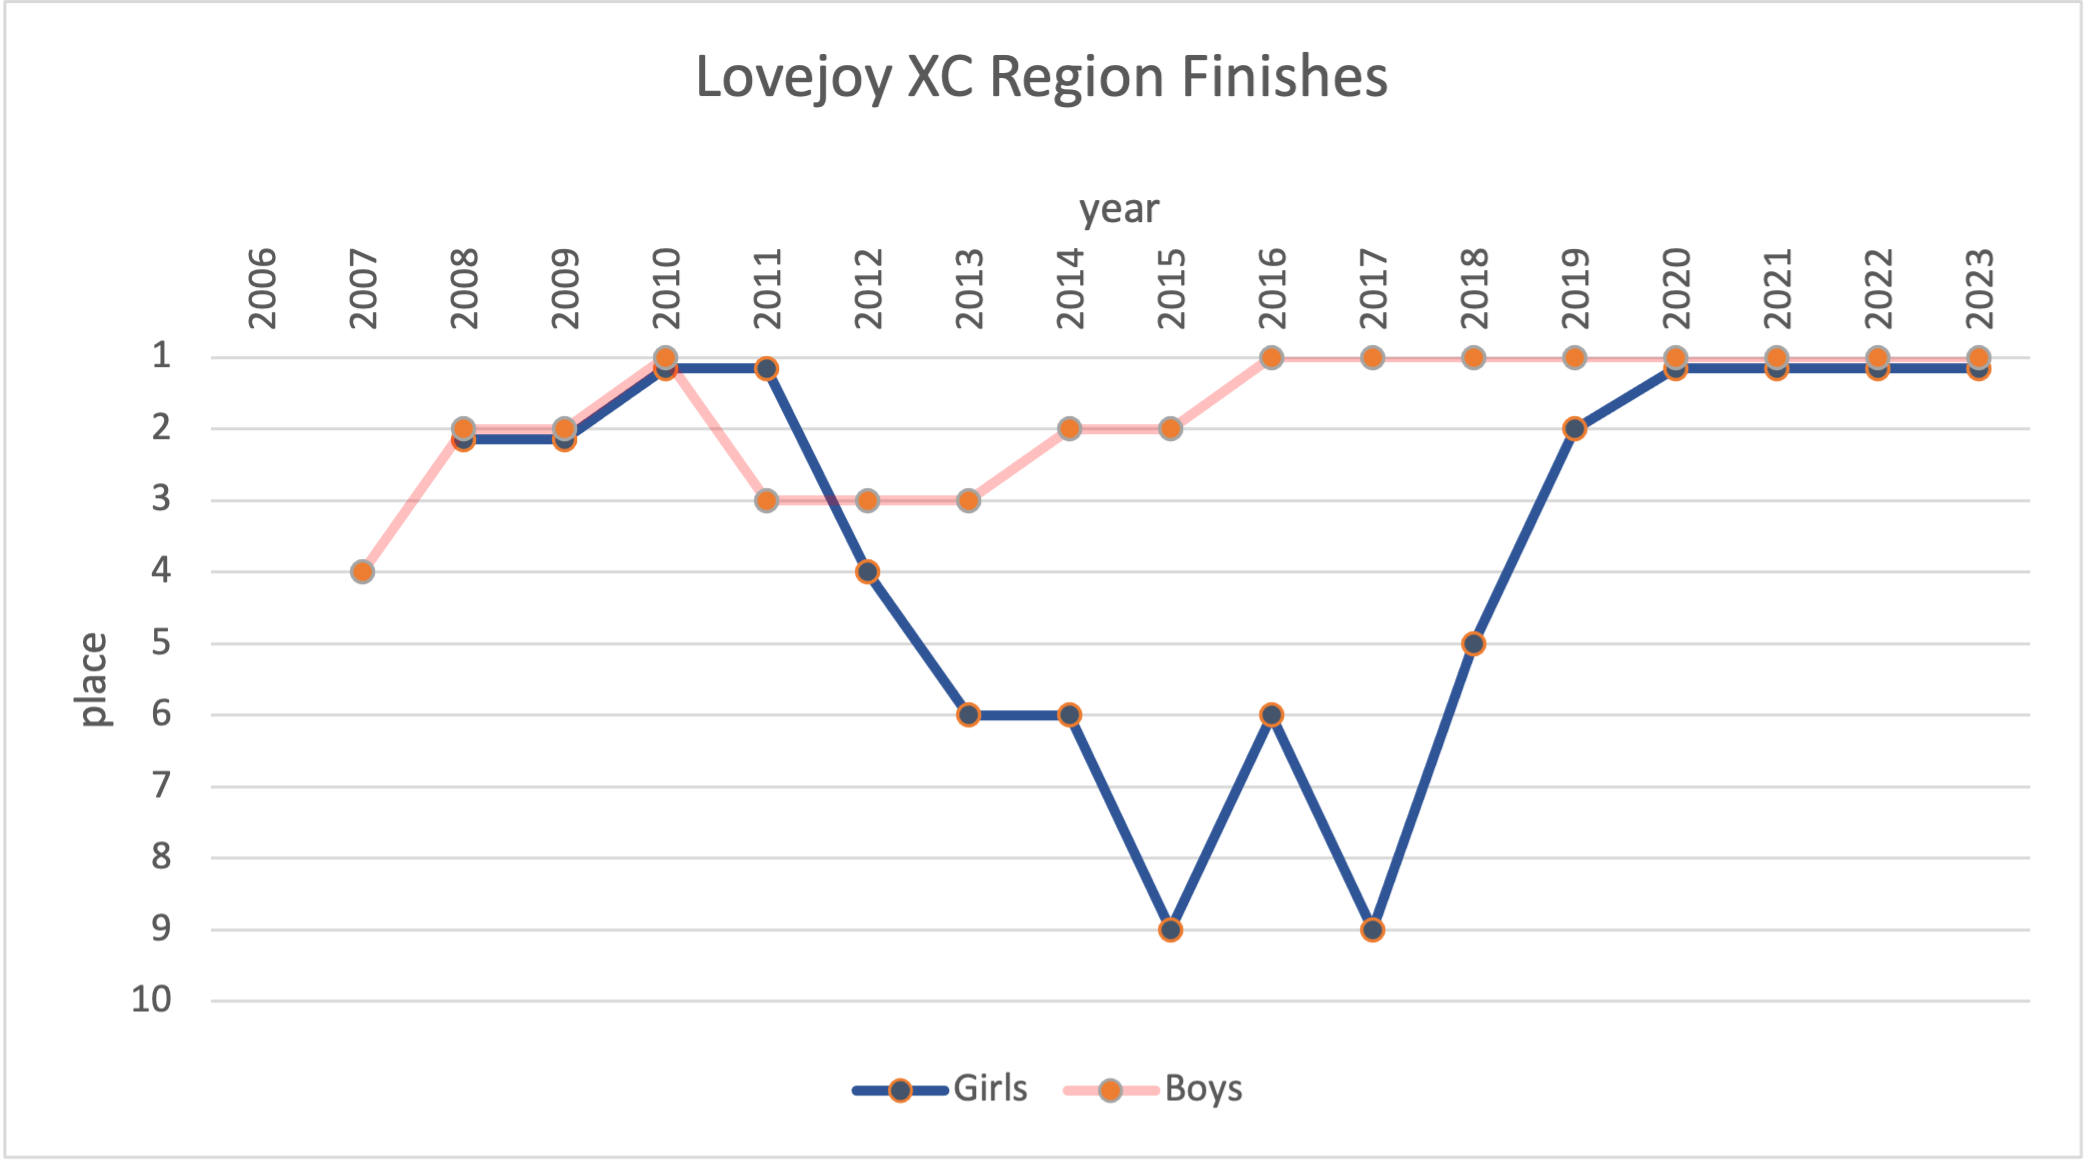 history of Lovejoy's finishes at the UIL Region II XC Championships